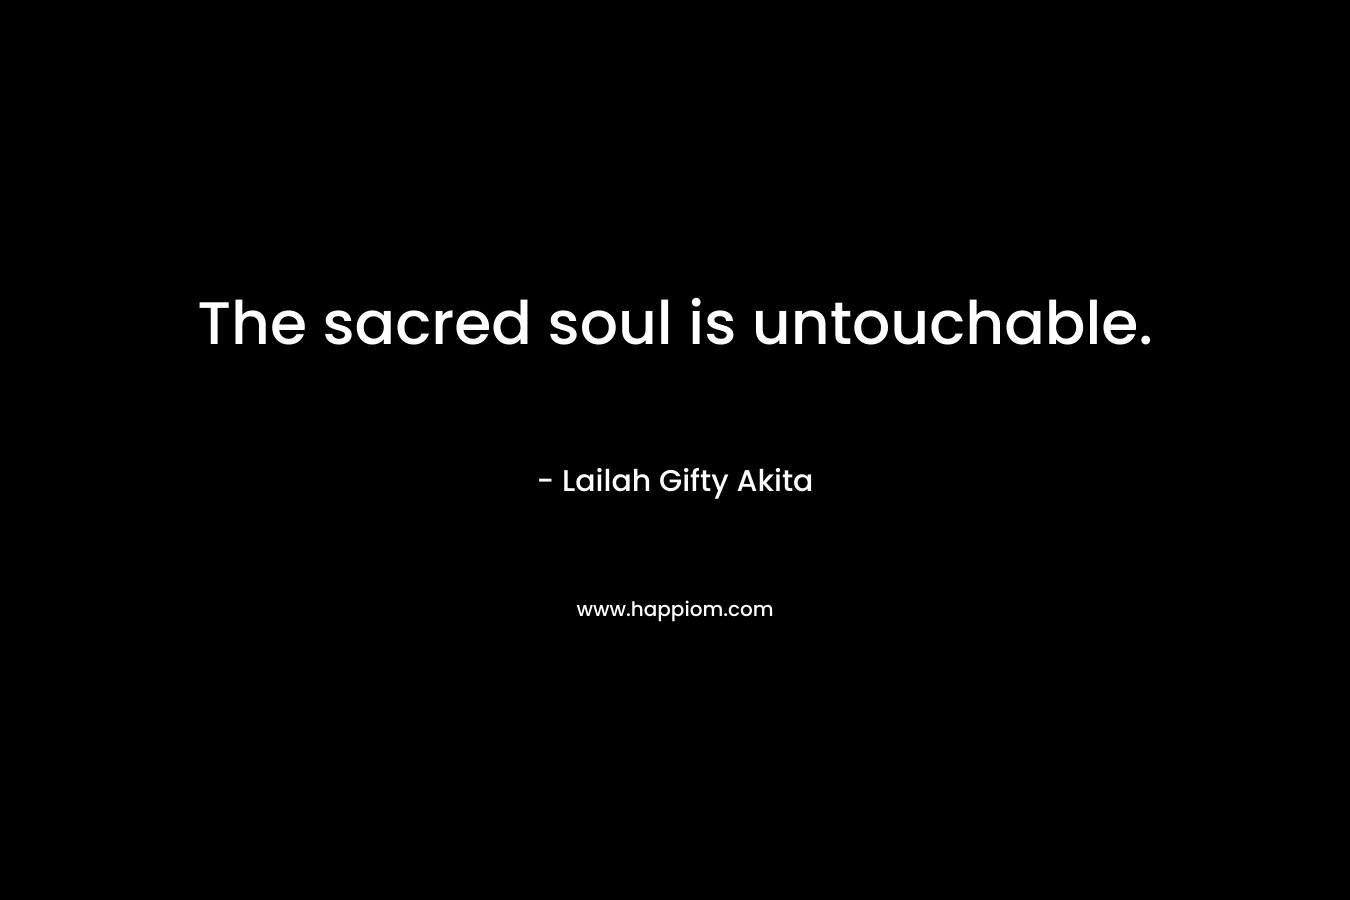 The sacred soul is untouchable.